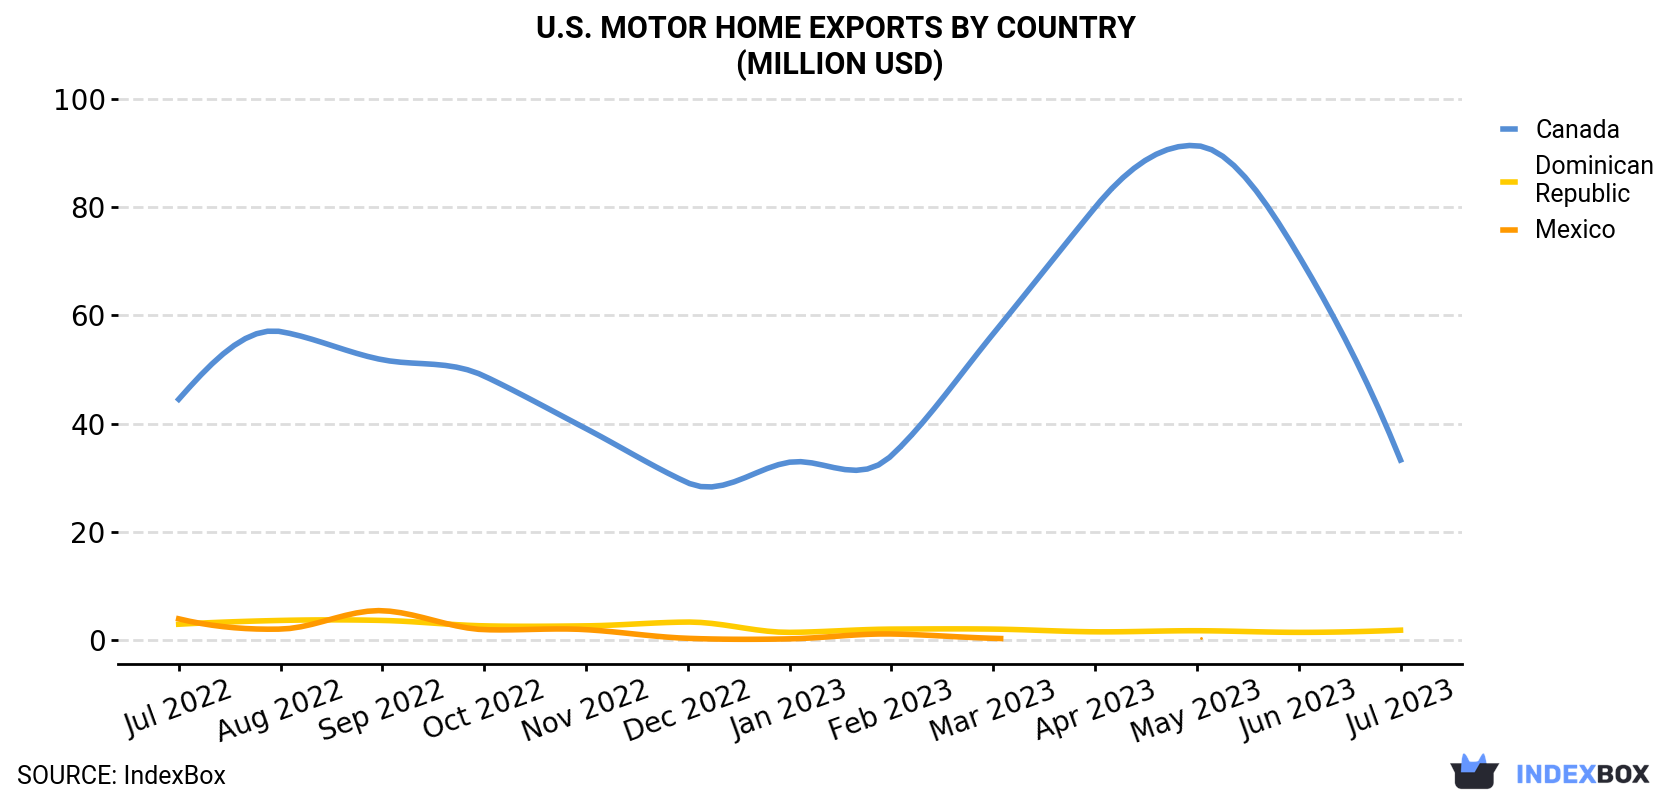 U.S. Motor Home Exports By Country (Million USD)